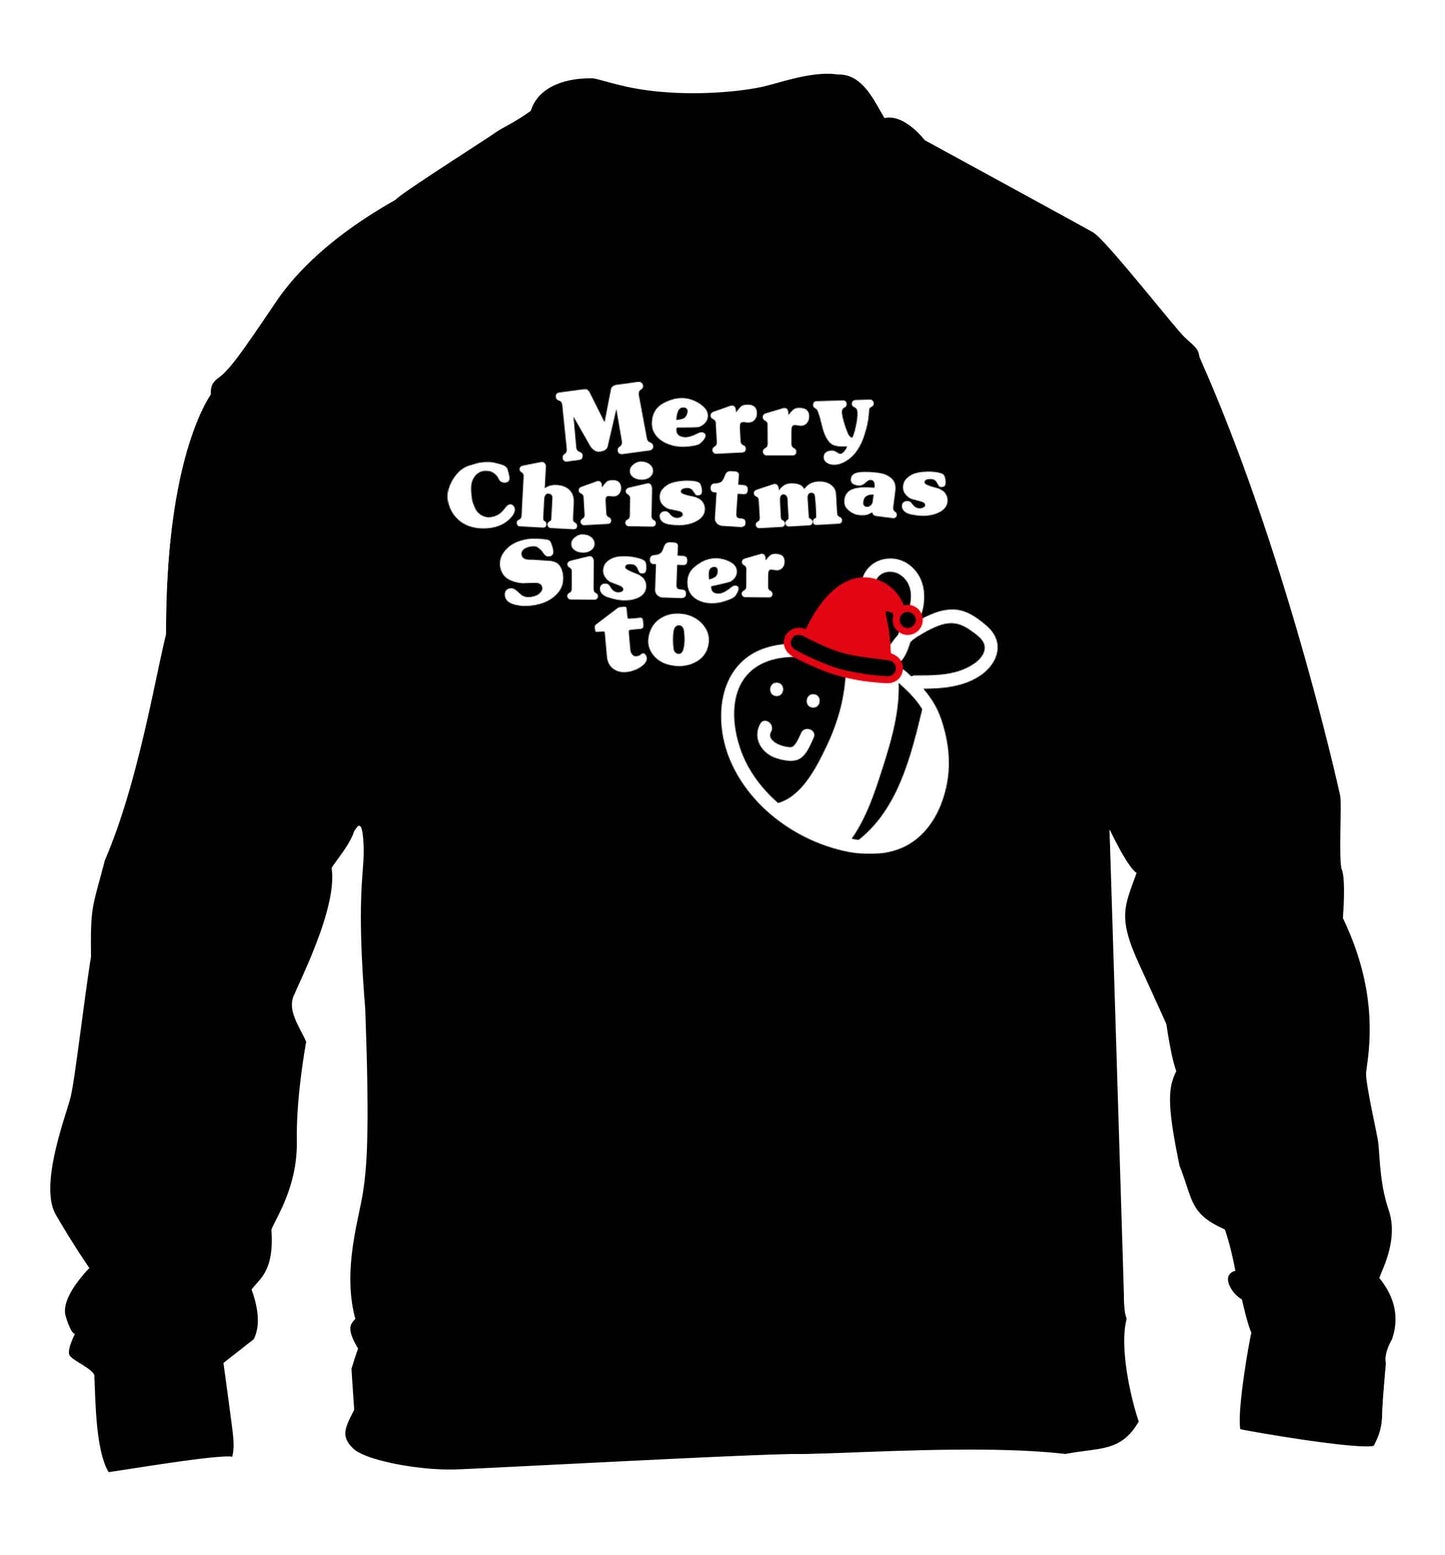 Merry Christmas sister to be children's black sweater 12-13 Years